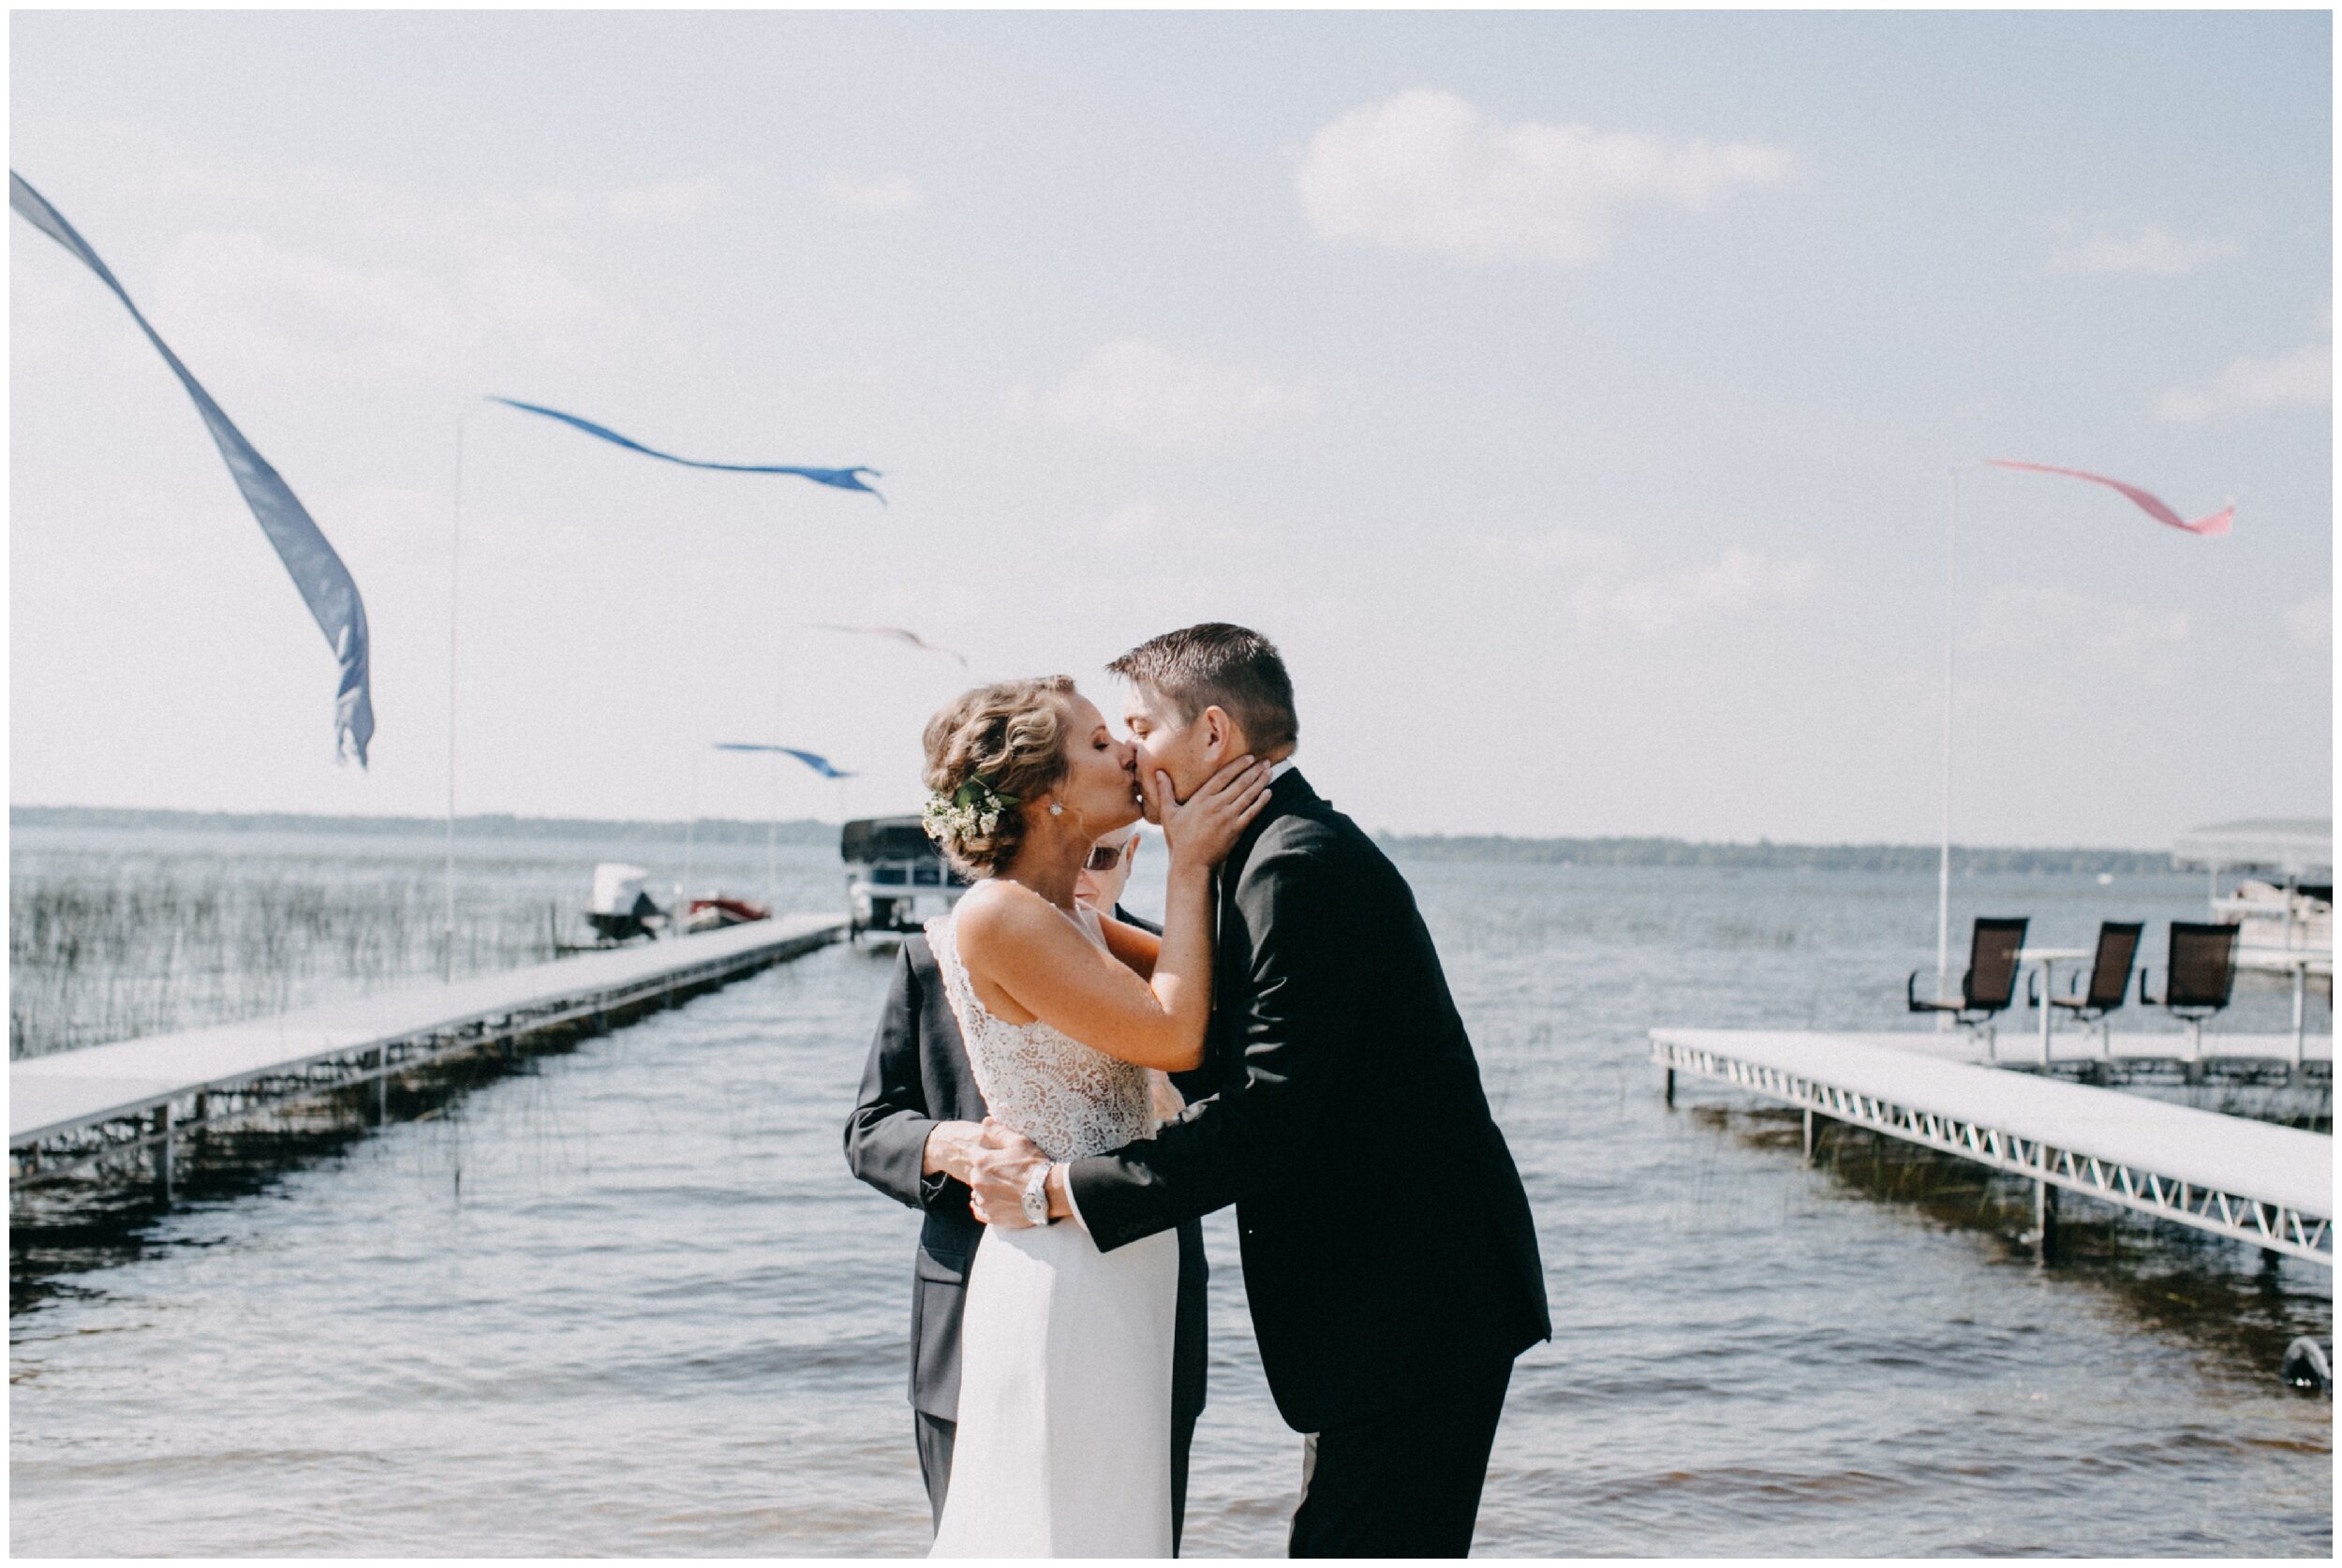 Bride and groom kiss after intimate lakeside wedding ceremony in Brainerd, Minnesota